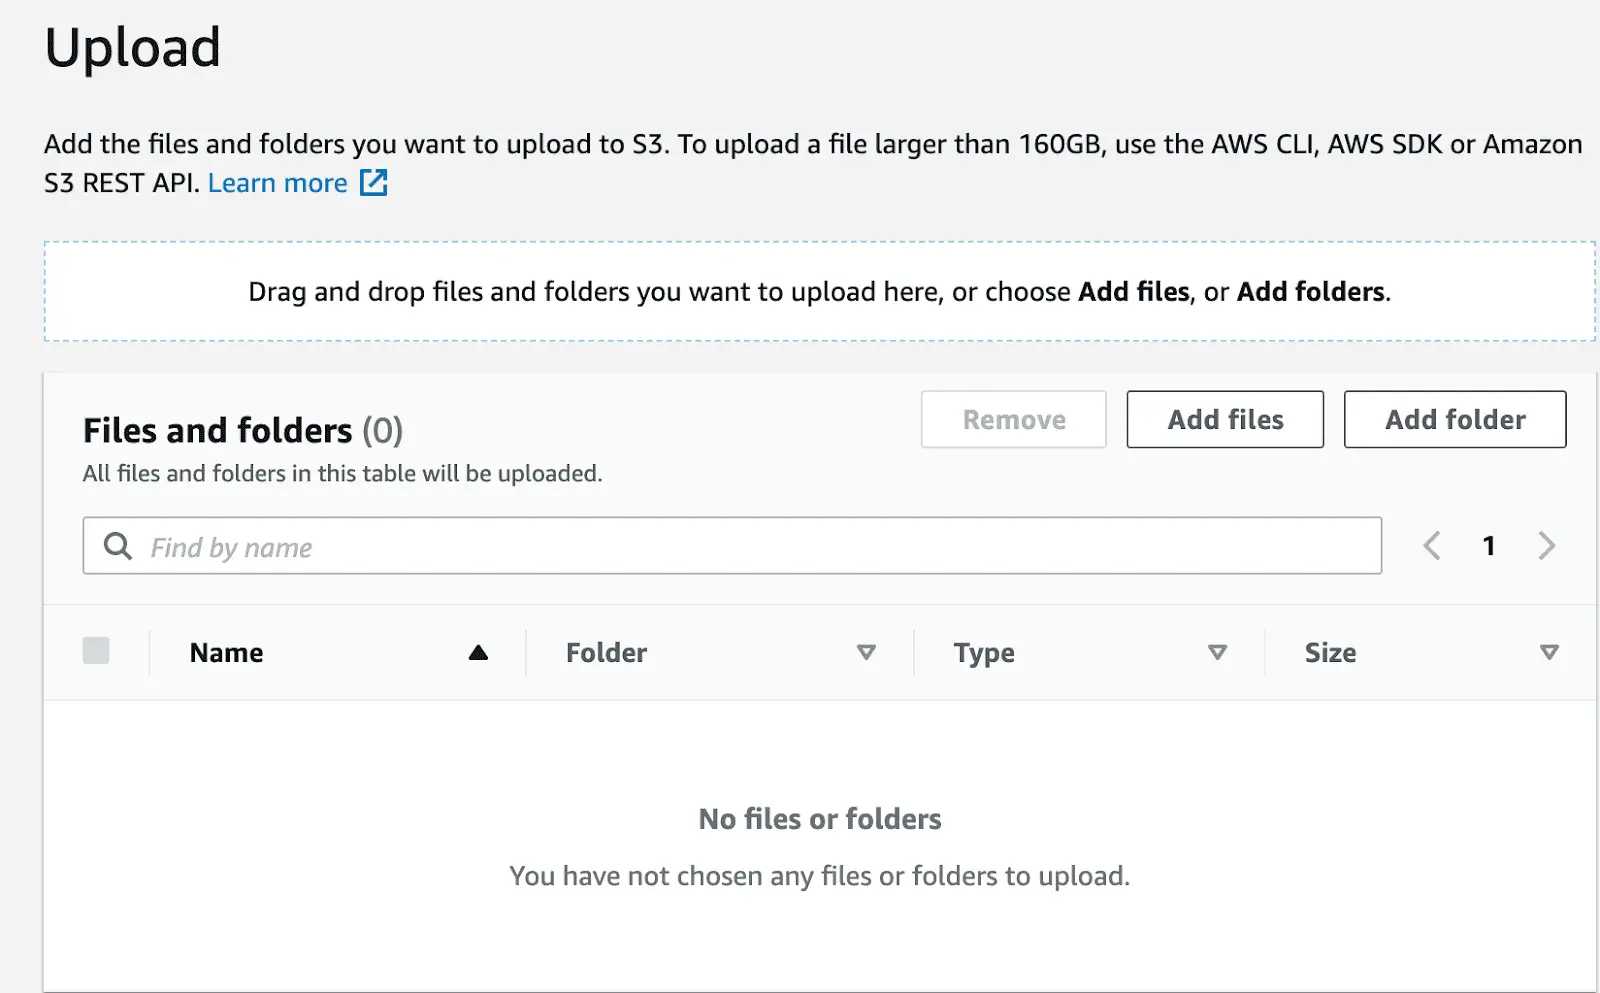 How to upload new files to your Amazon S3 Bucket